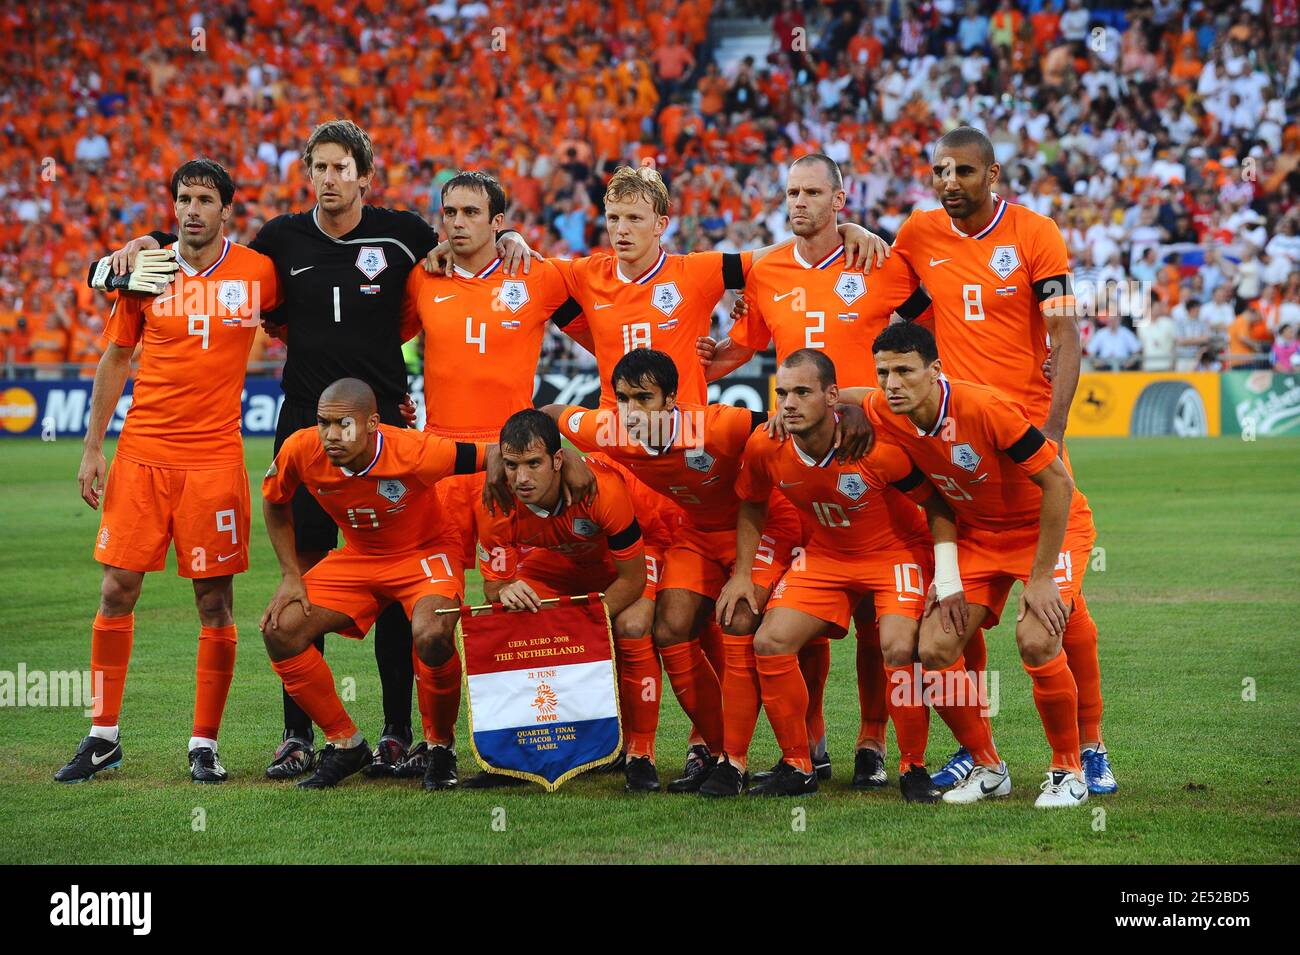 Netherlands' team group during the Euro 2008 UEFA European Championship  2008, quarter final soccer match, Netherlands vs Russia at the St.  Jakob-Park stadium in Basel, Switzerland on June 21, 2008. Russia won